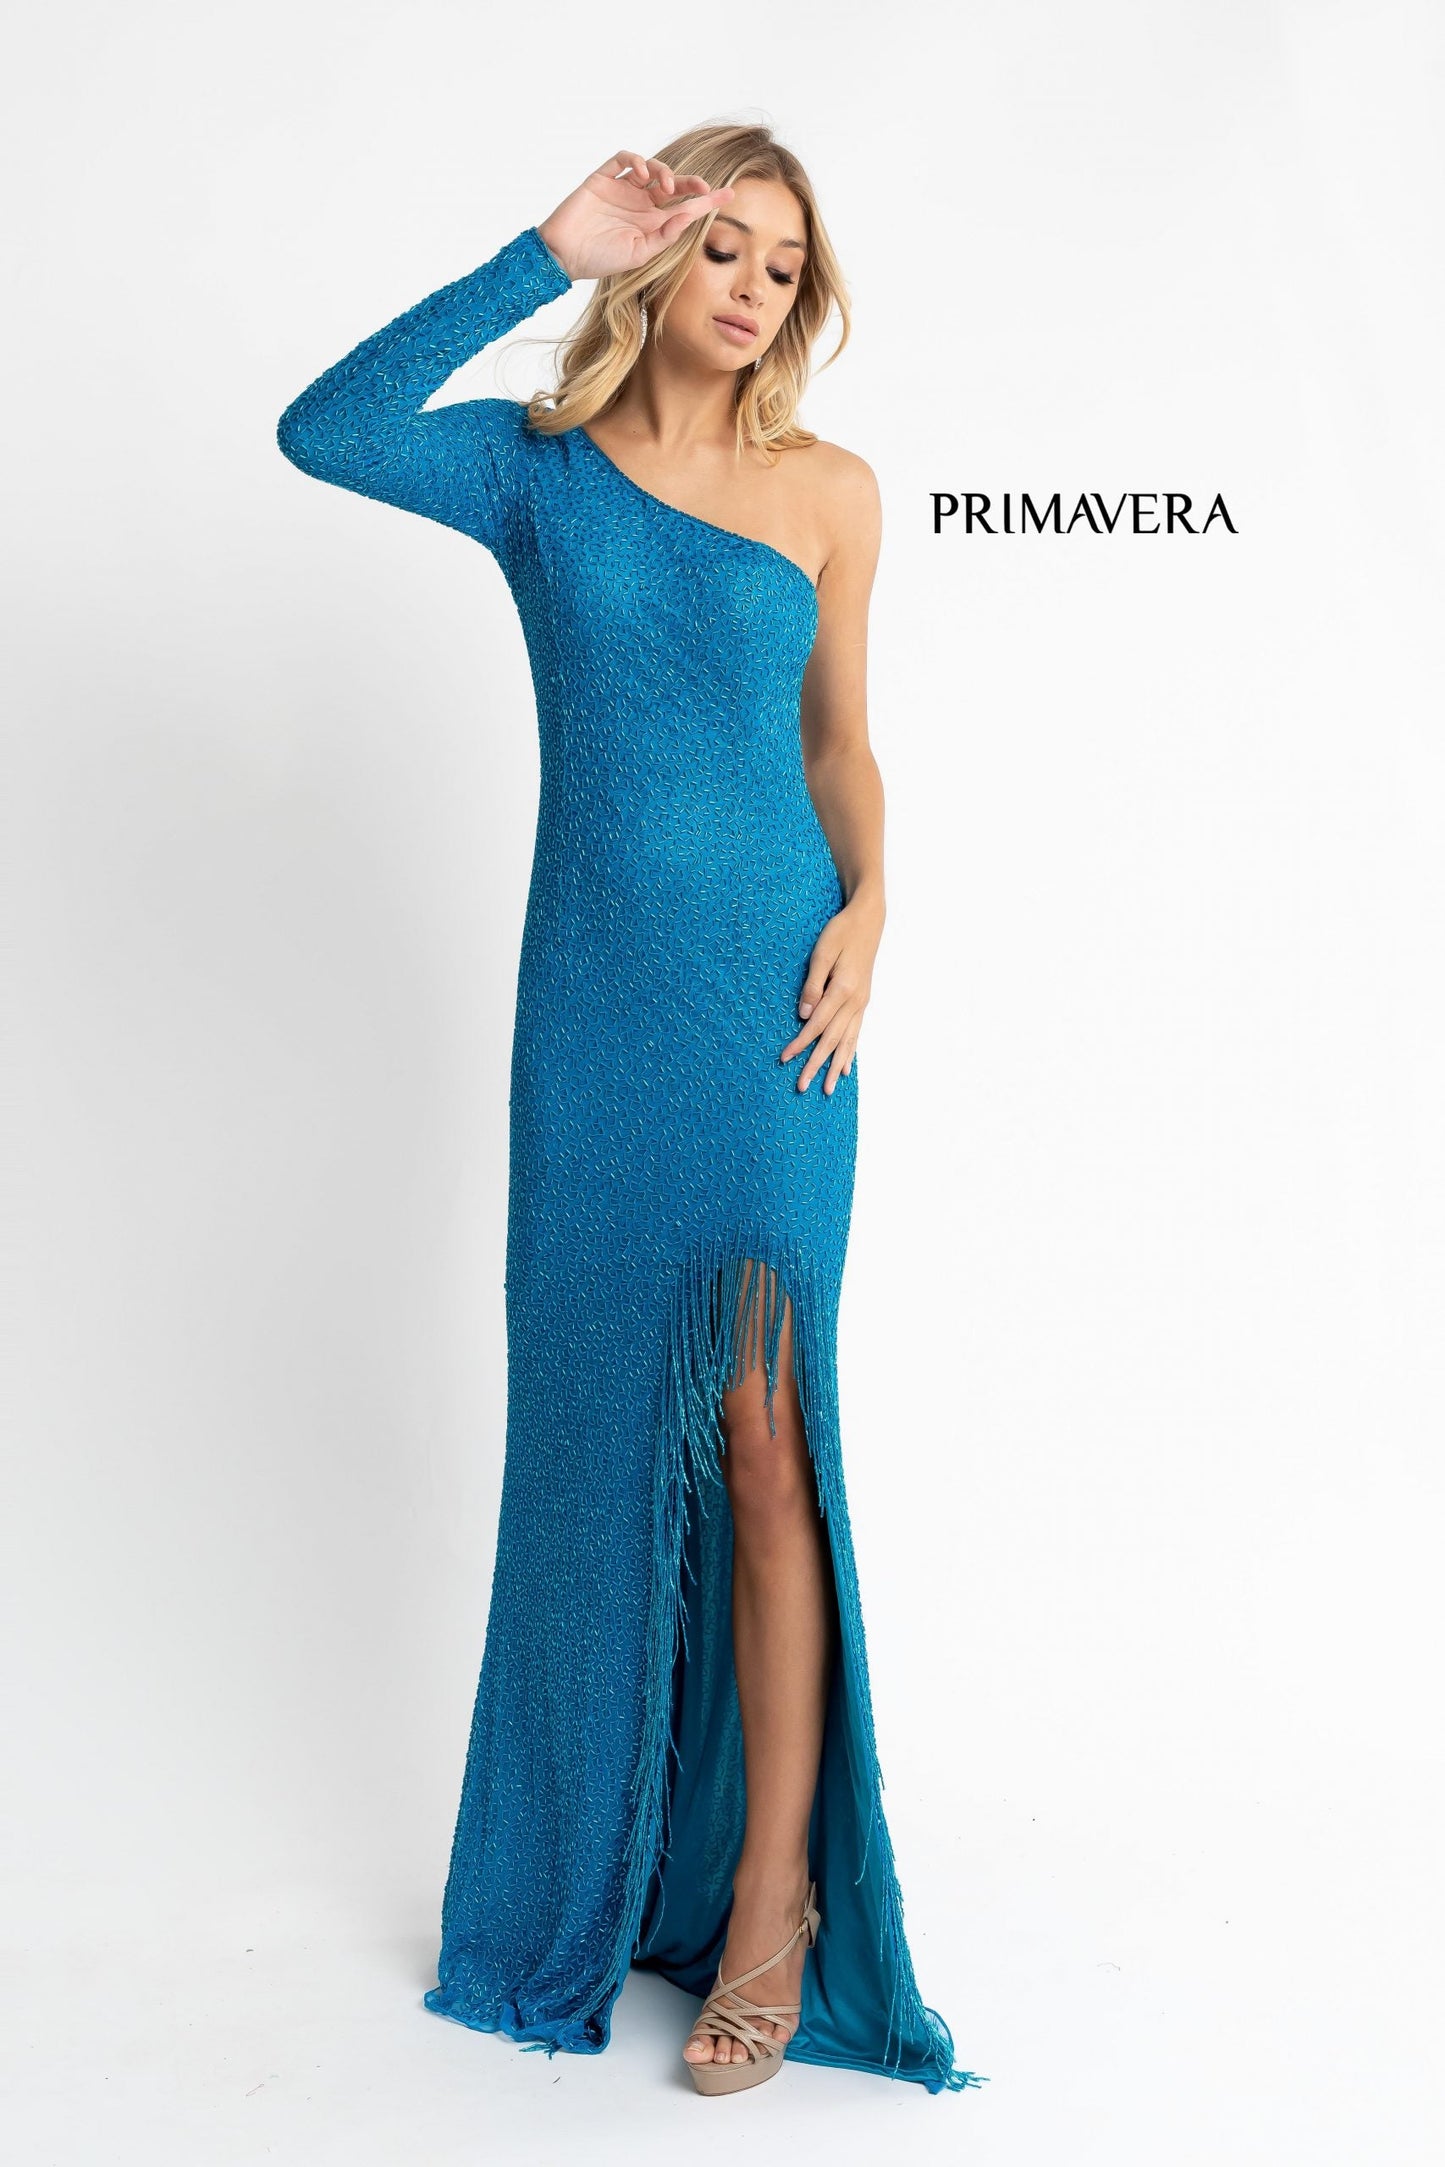 Primavera Couture 3773 Size 2 Beaded One Long Sleeve Prom Dress Evening Gown Fringe Open Slit